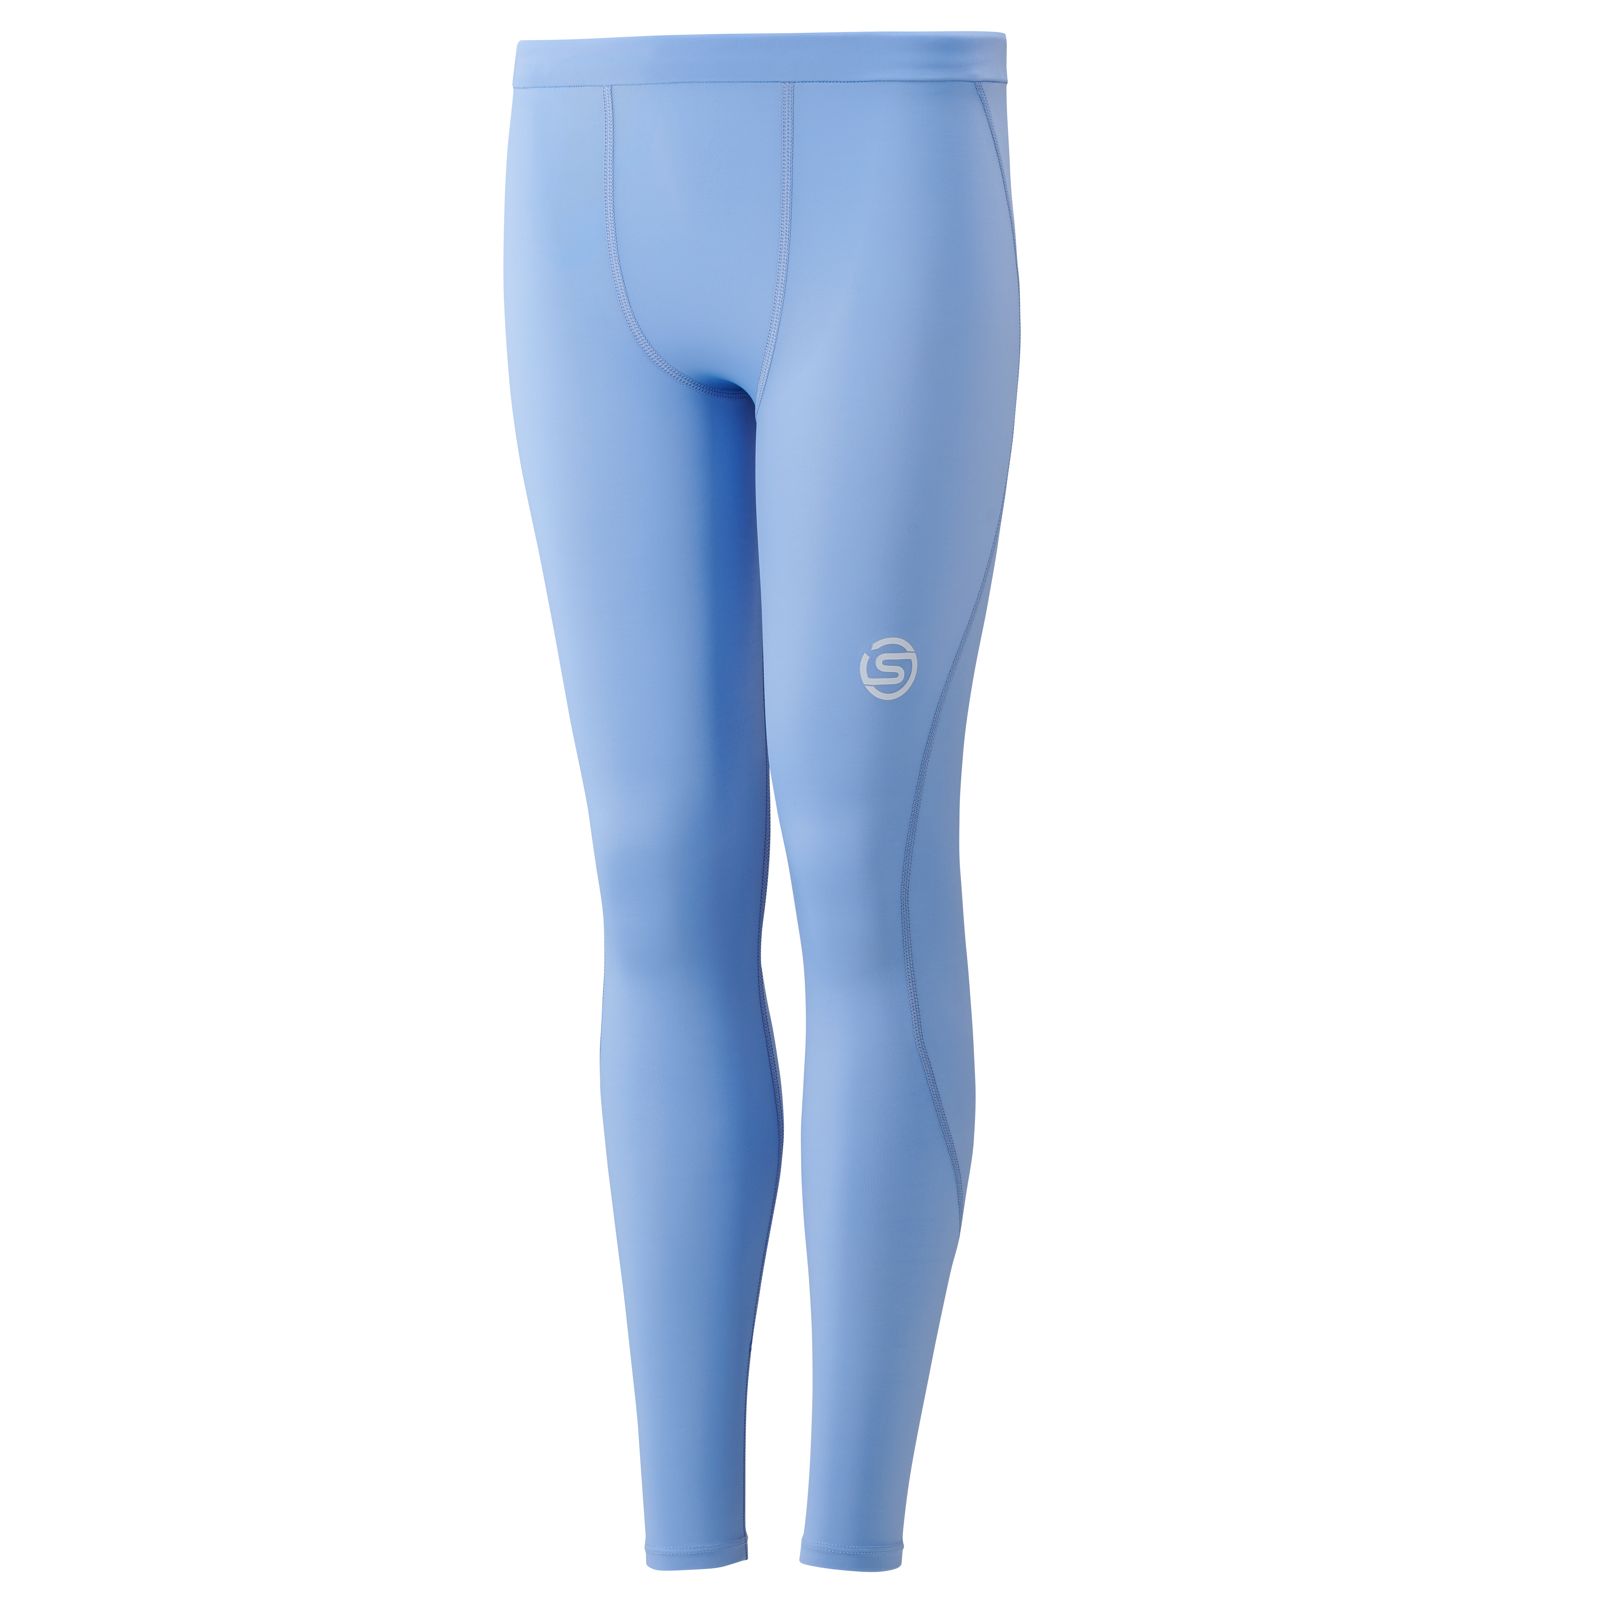 SKINS SERIES-1 YOUTH LONG TIGHTS SKY BLUE - SKINS Compression UK